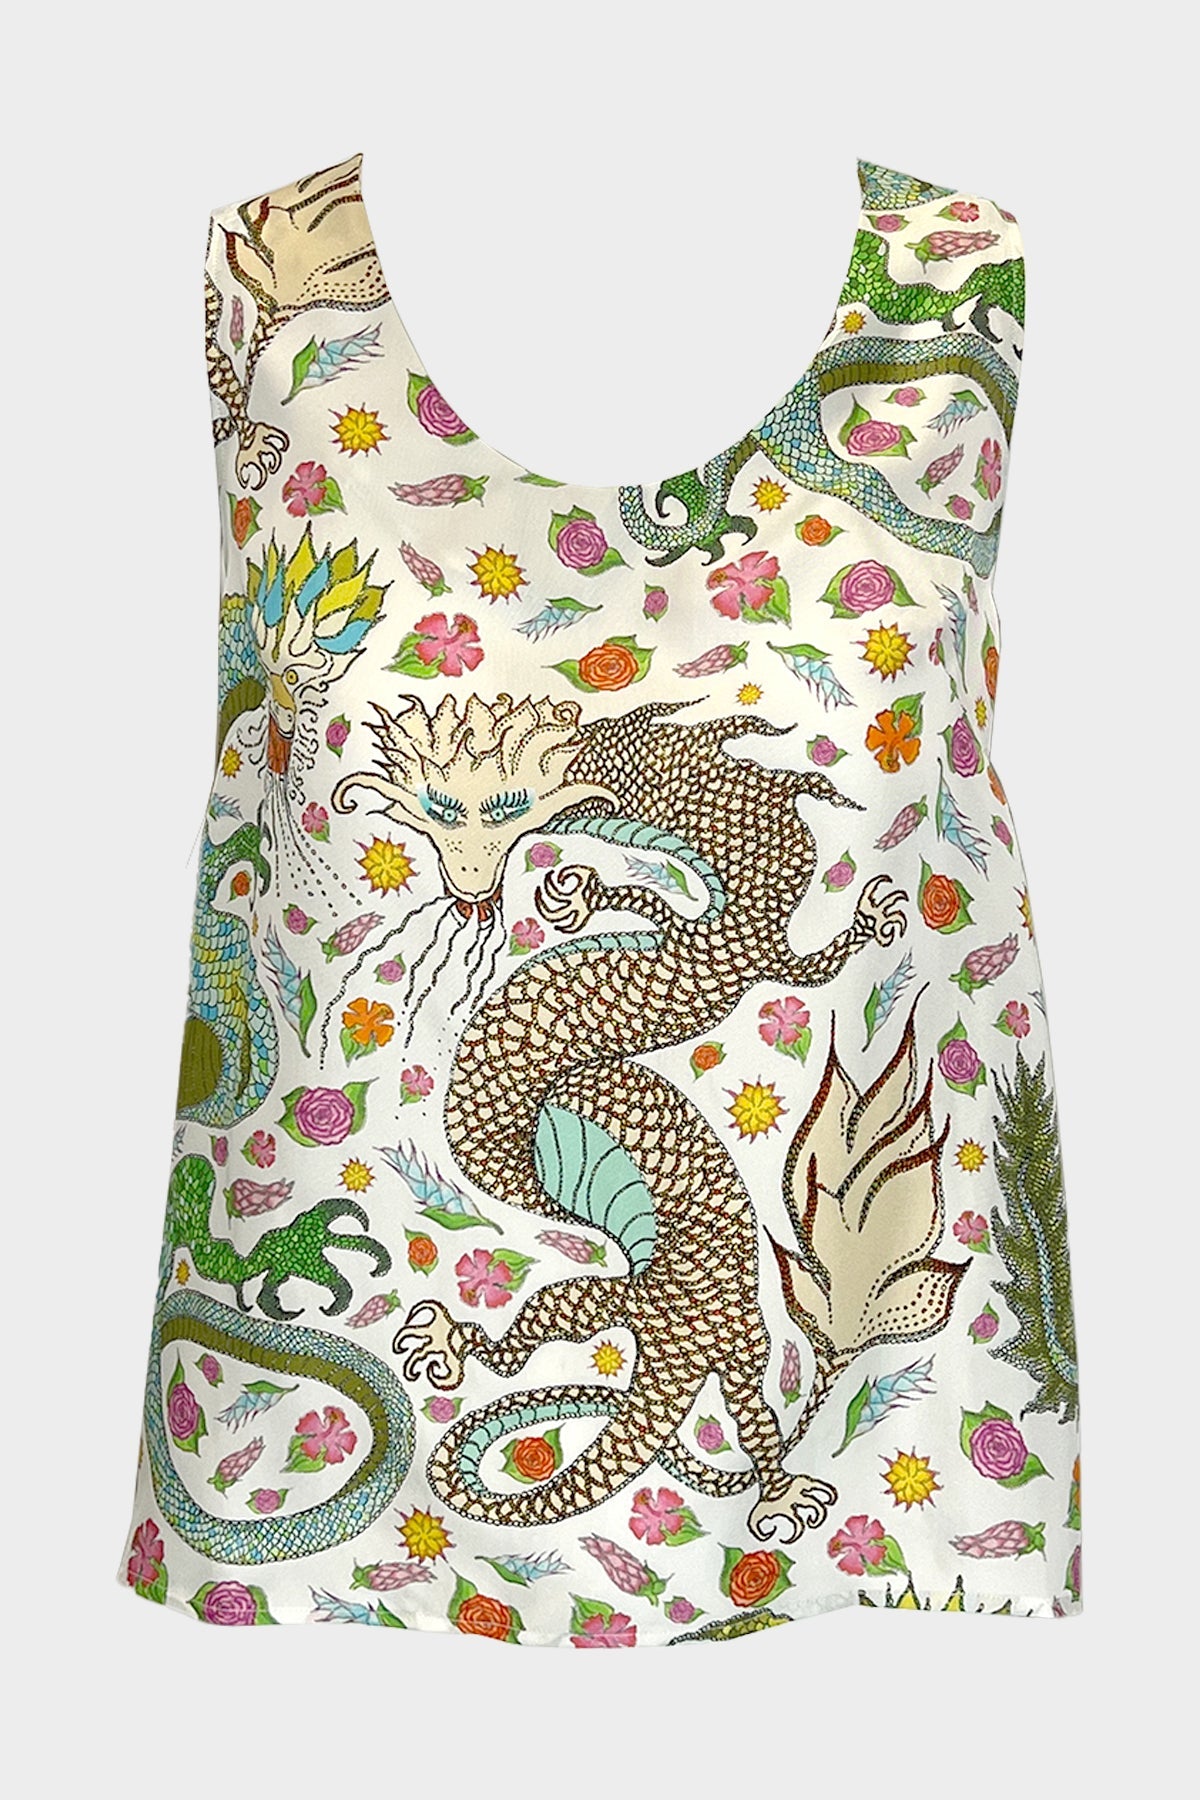 Dierde Top in Mix White Morocco Dragons - shop-olivia.com